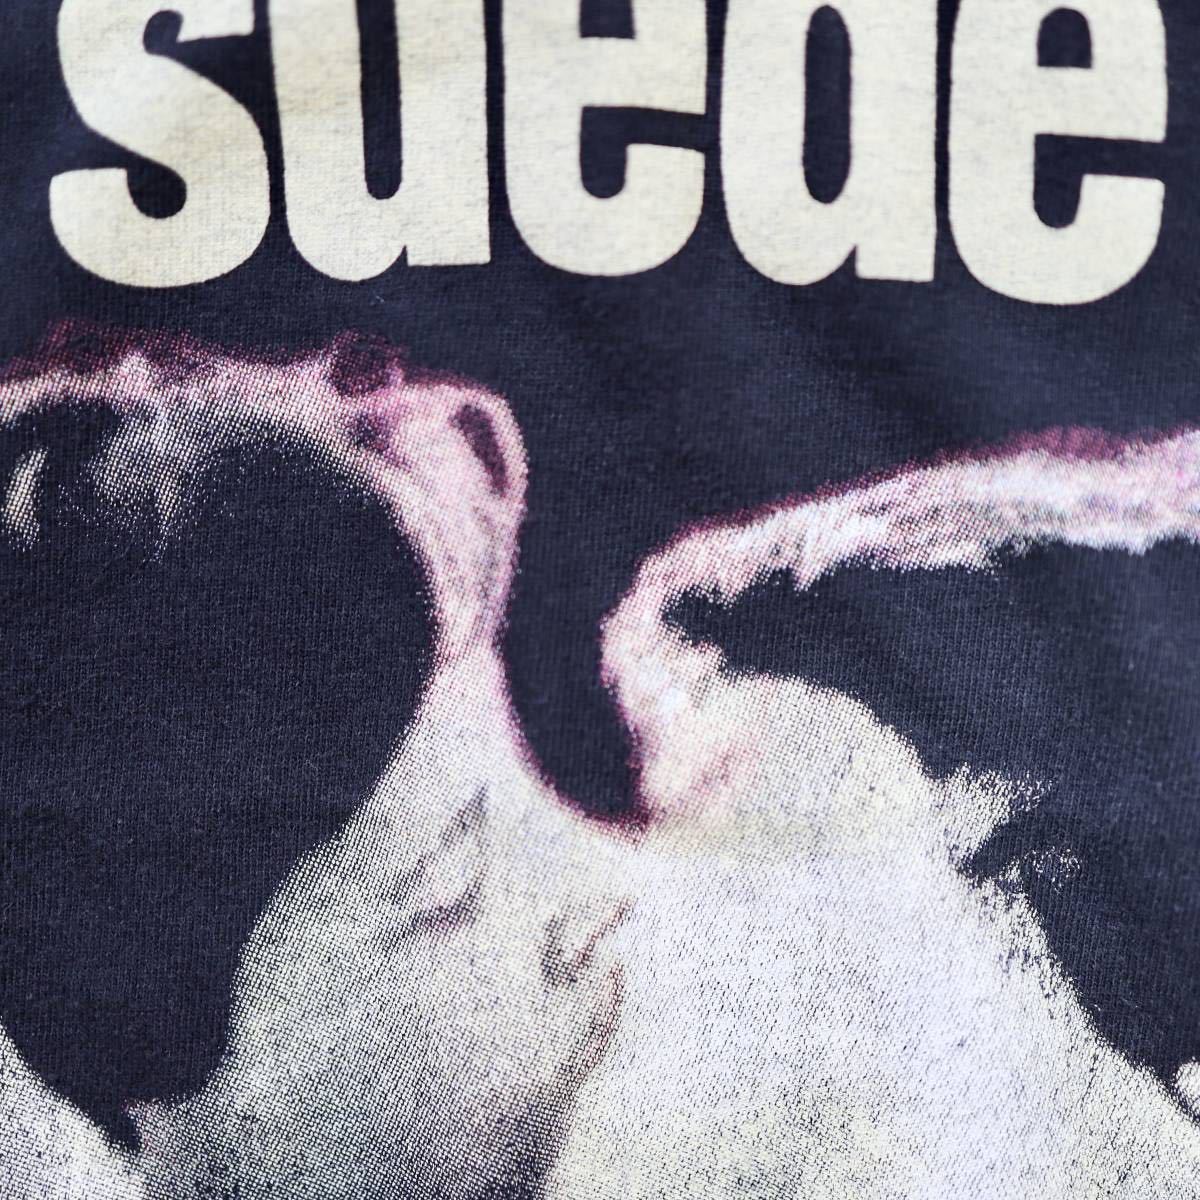  super special! 1993 Suede Debut Album Vintage T-shirt at that time thing original 80s 90s band Helter-skelter music 